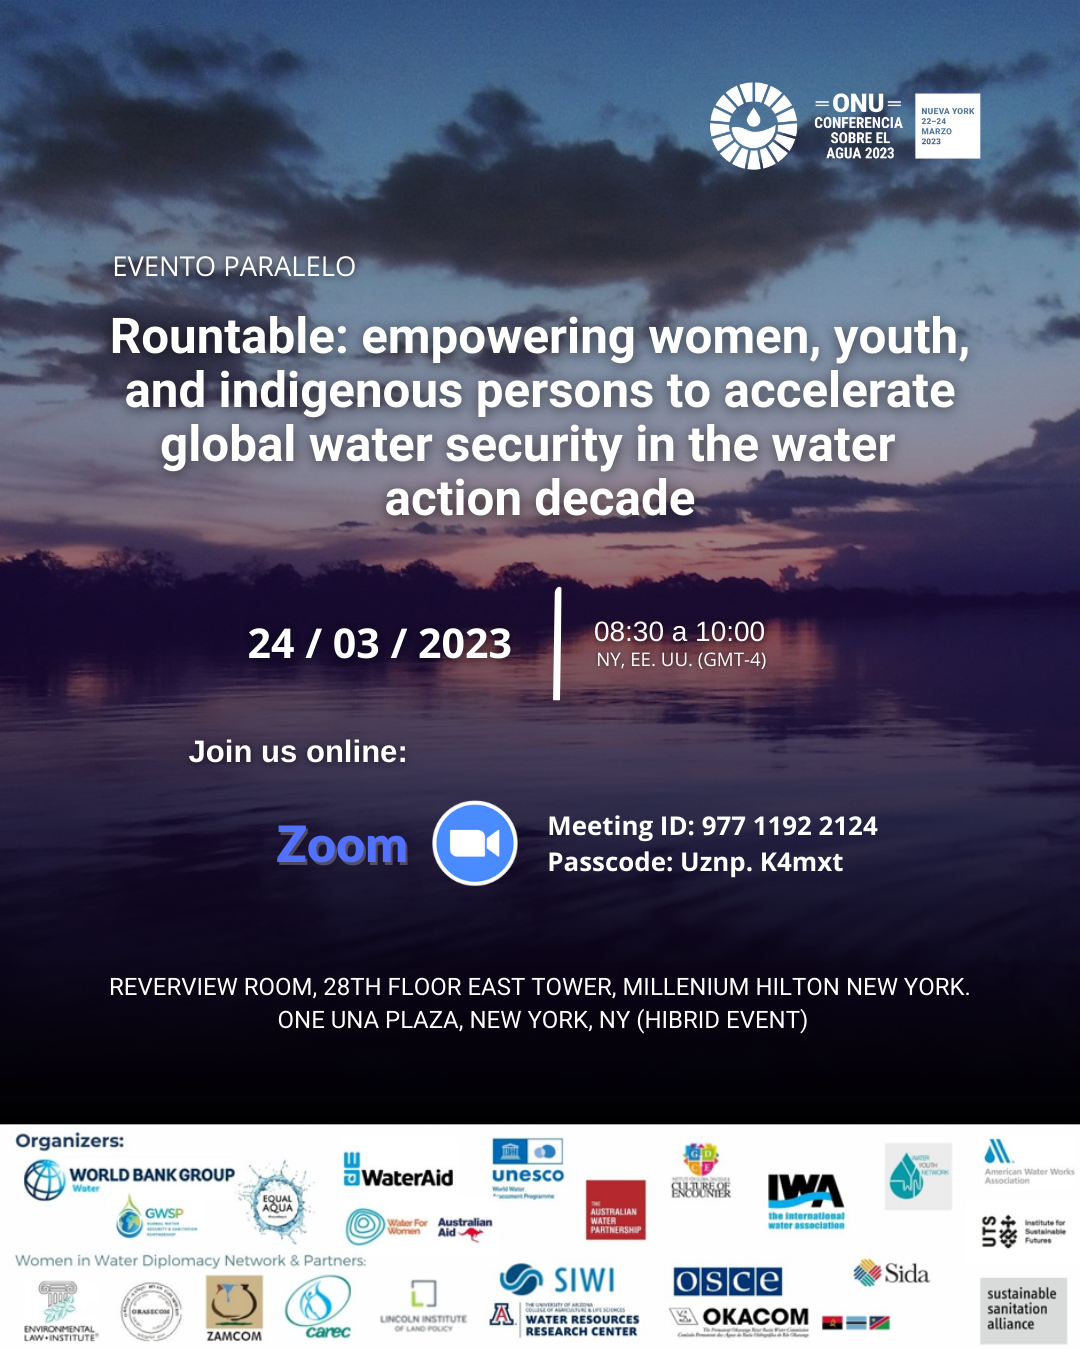 <strong>Rountable: empowering women, youth, and indigenous persons to accelerate global water security in the water action decade</strong>